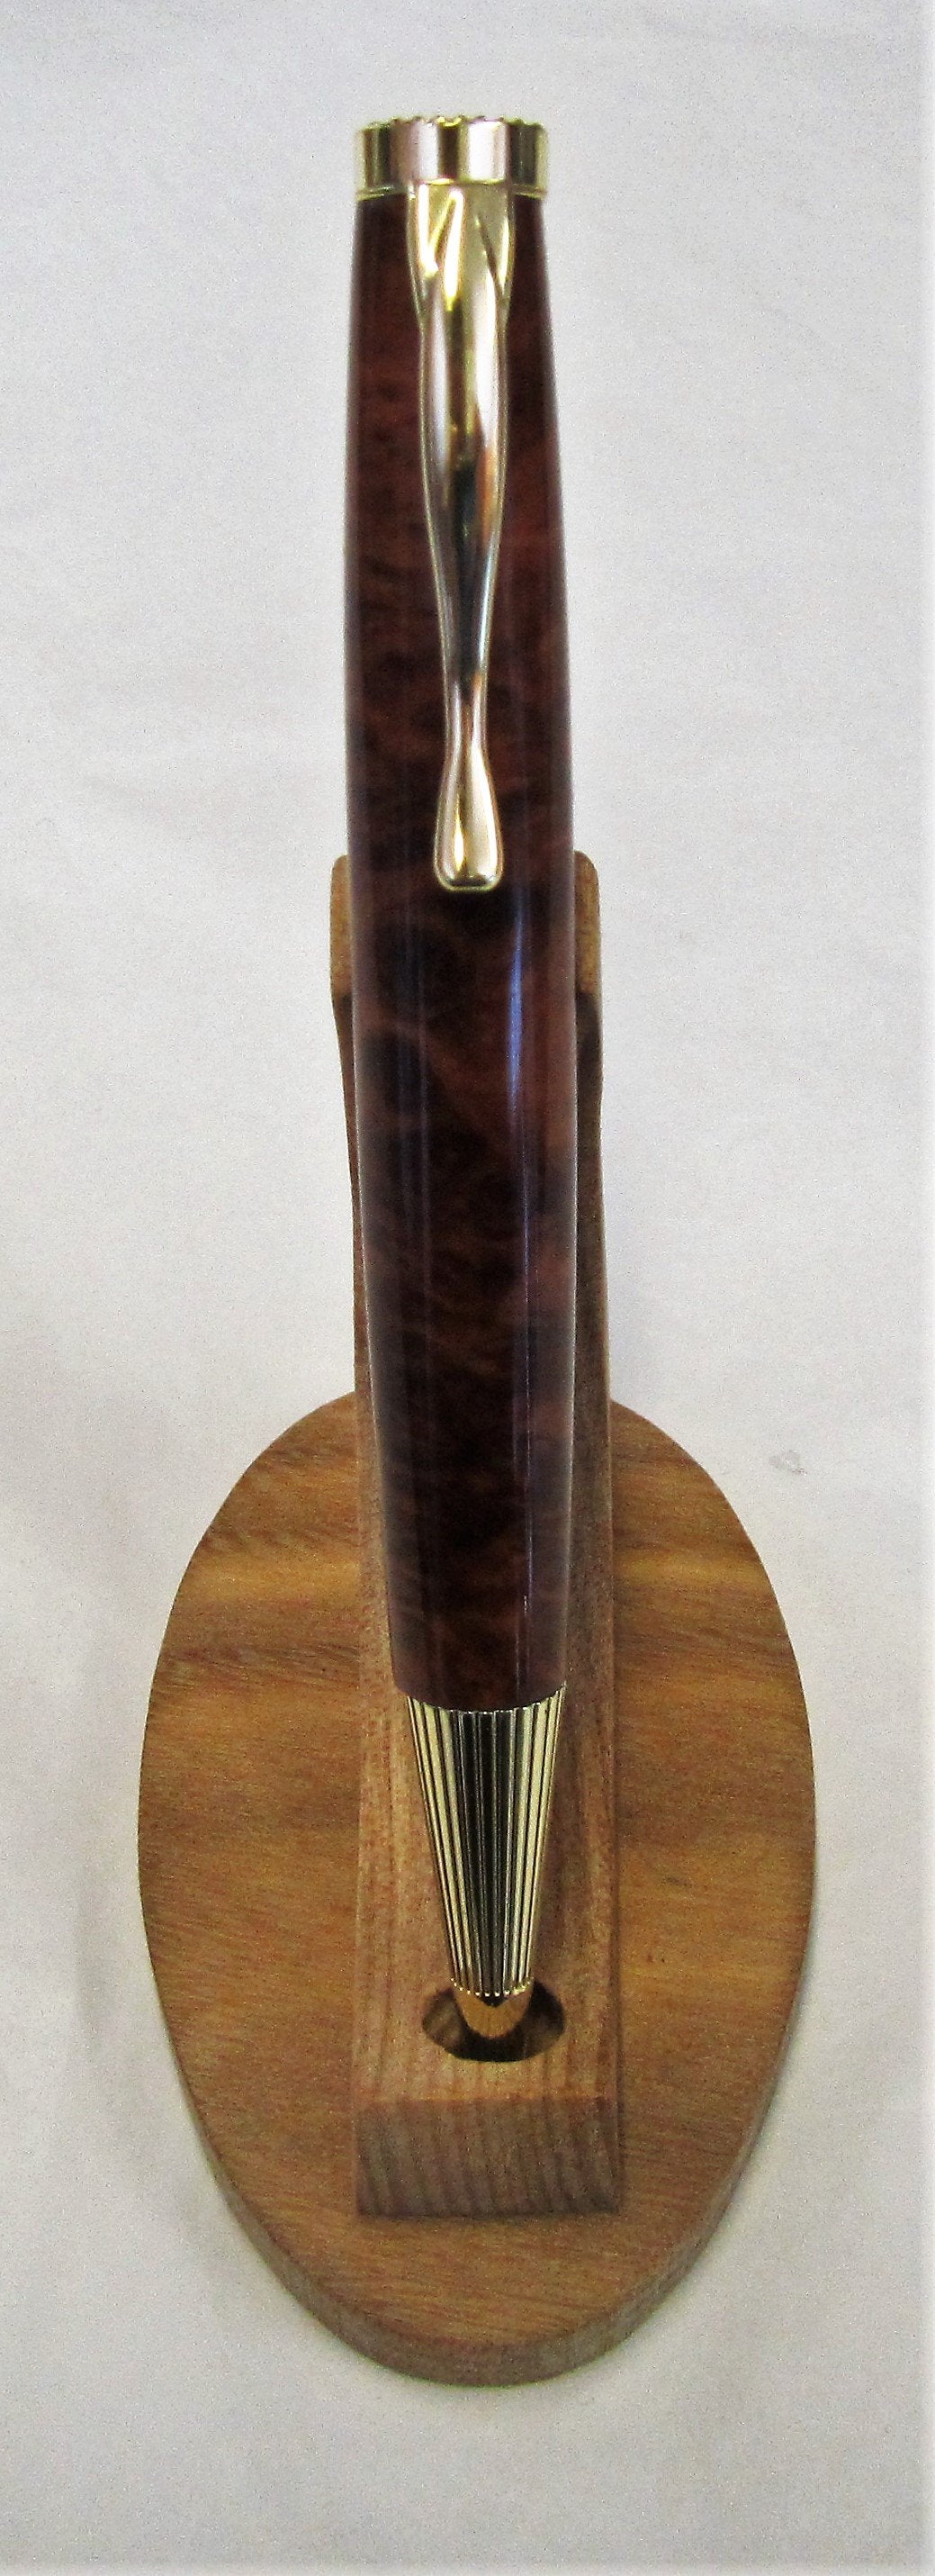 Handcrafted Thuya Burr wood pen with various fittings and pen types.